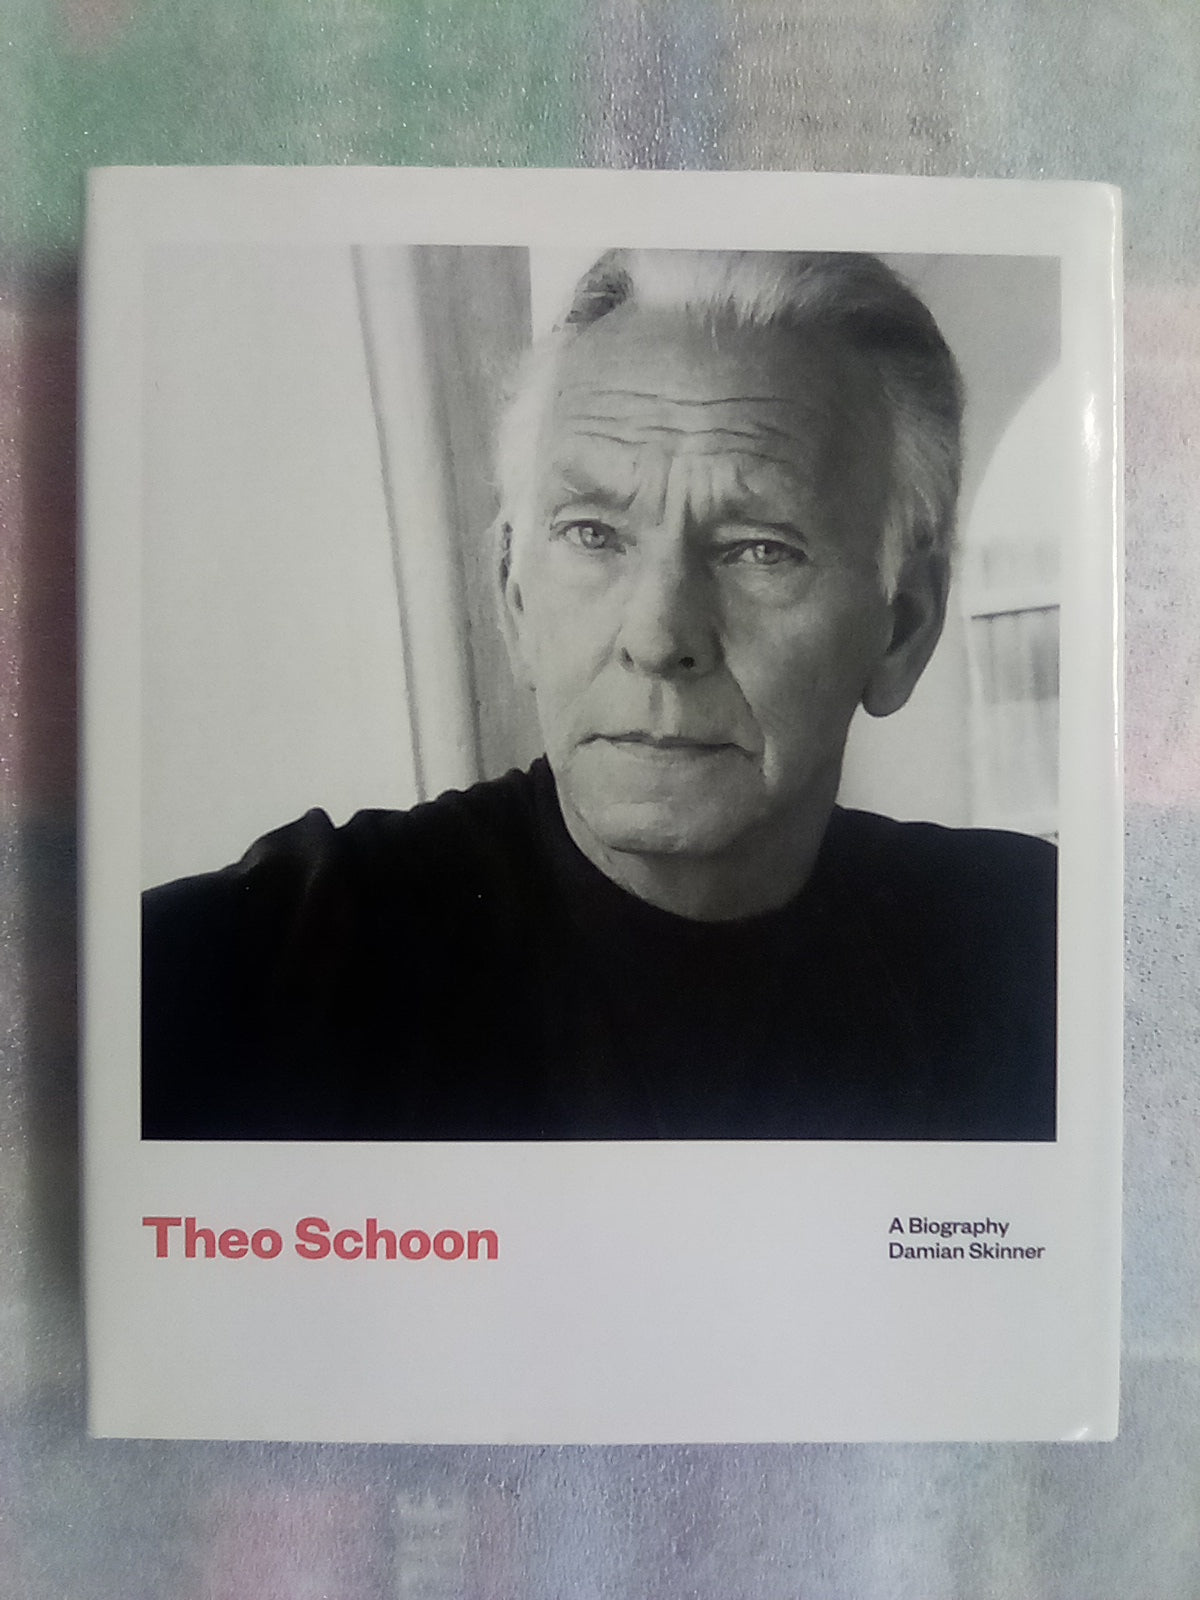 Theo Schoon - A Biography by Damian Skinner